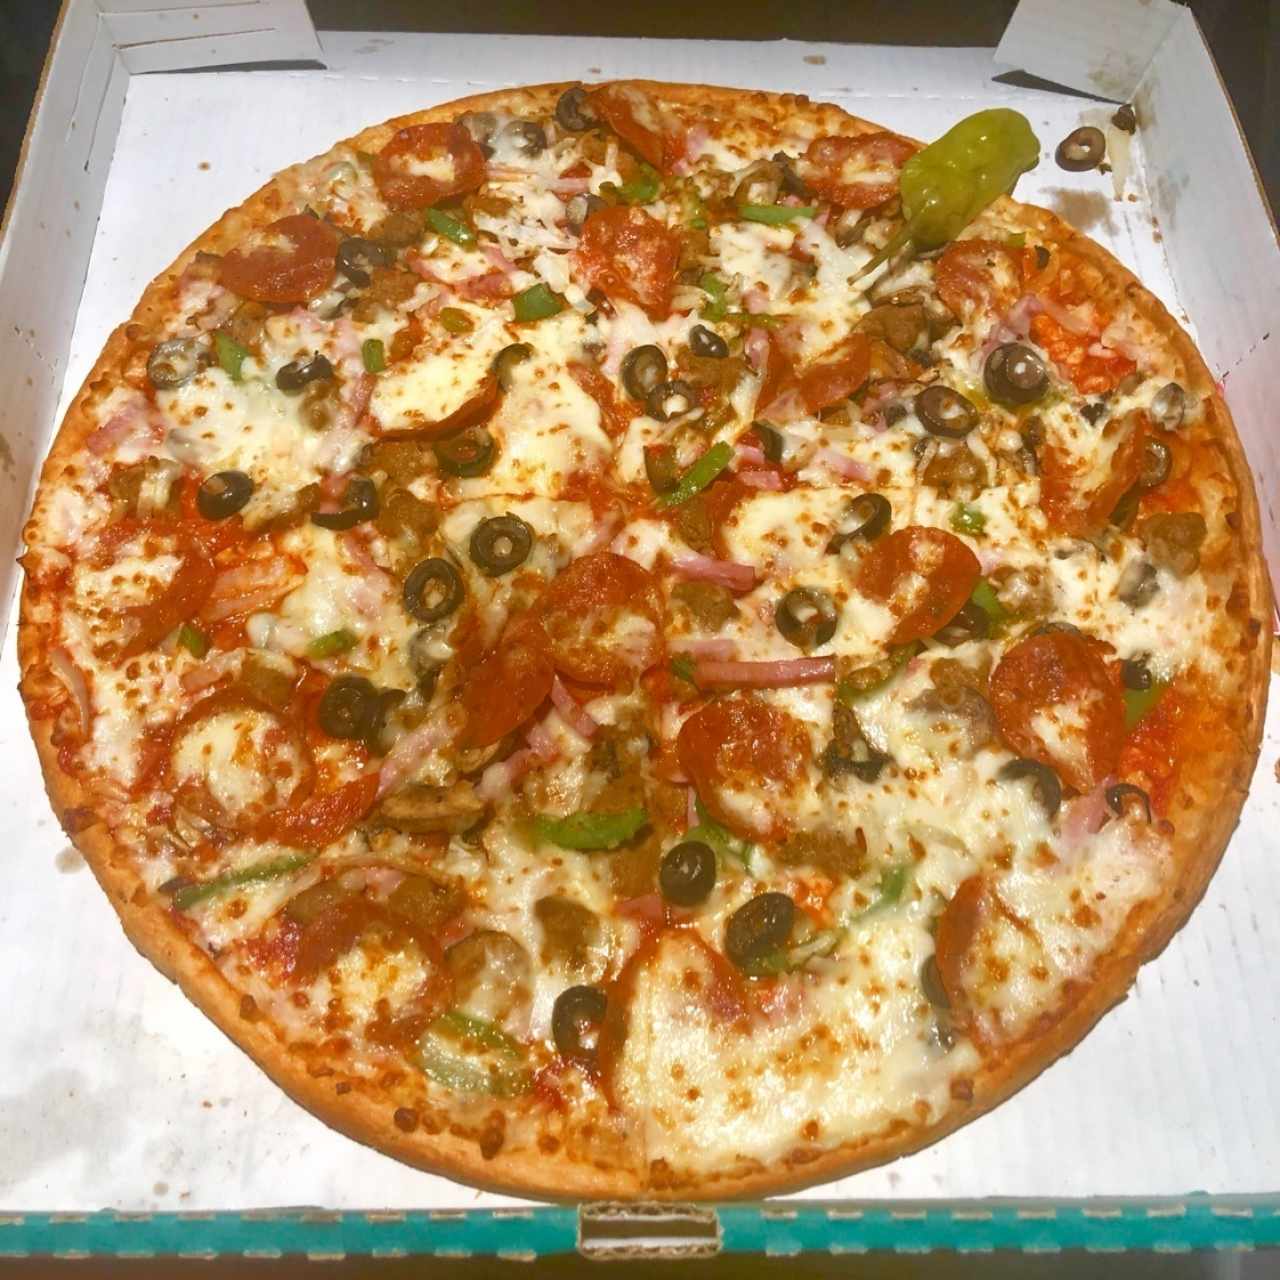 The works pizza - specialty